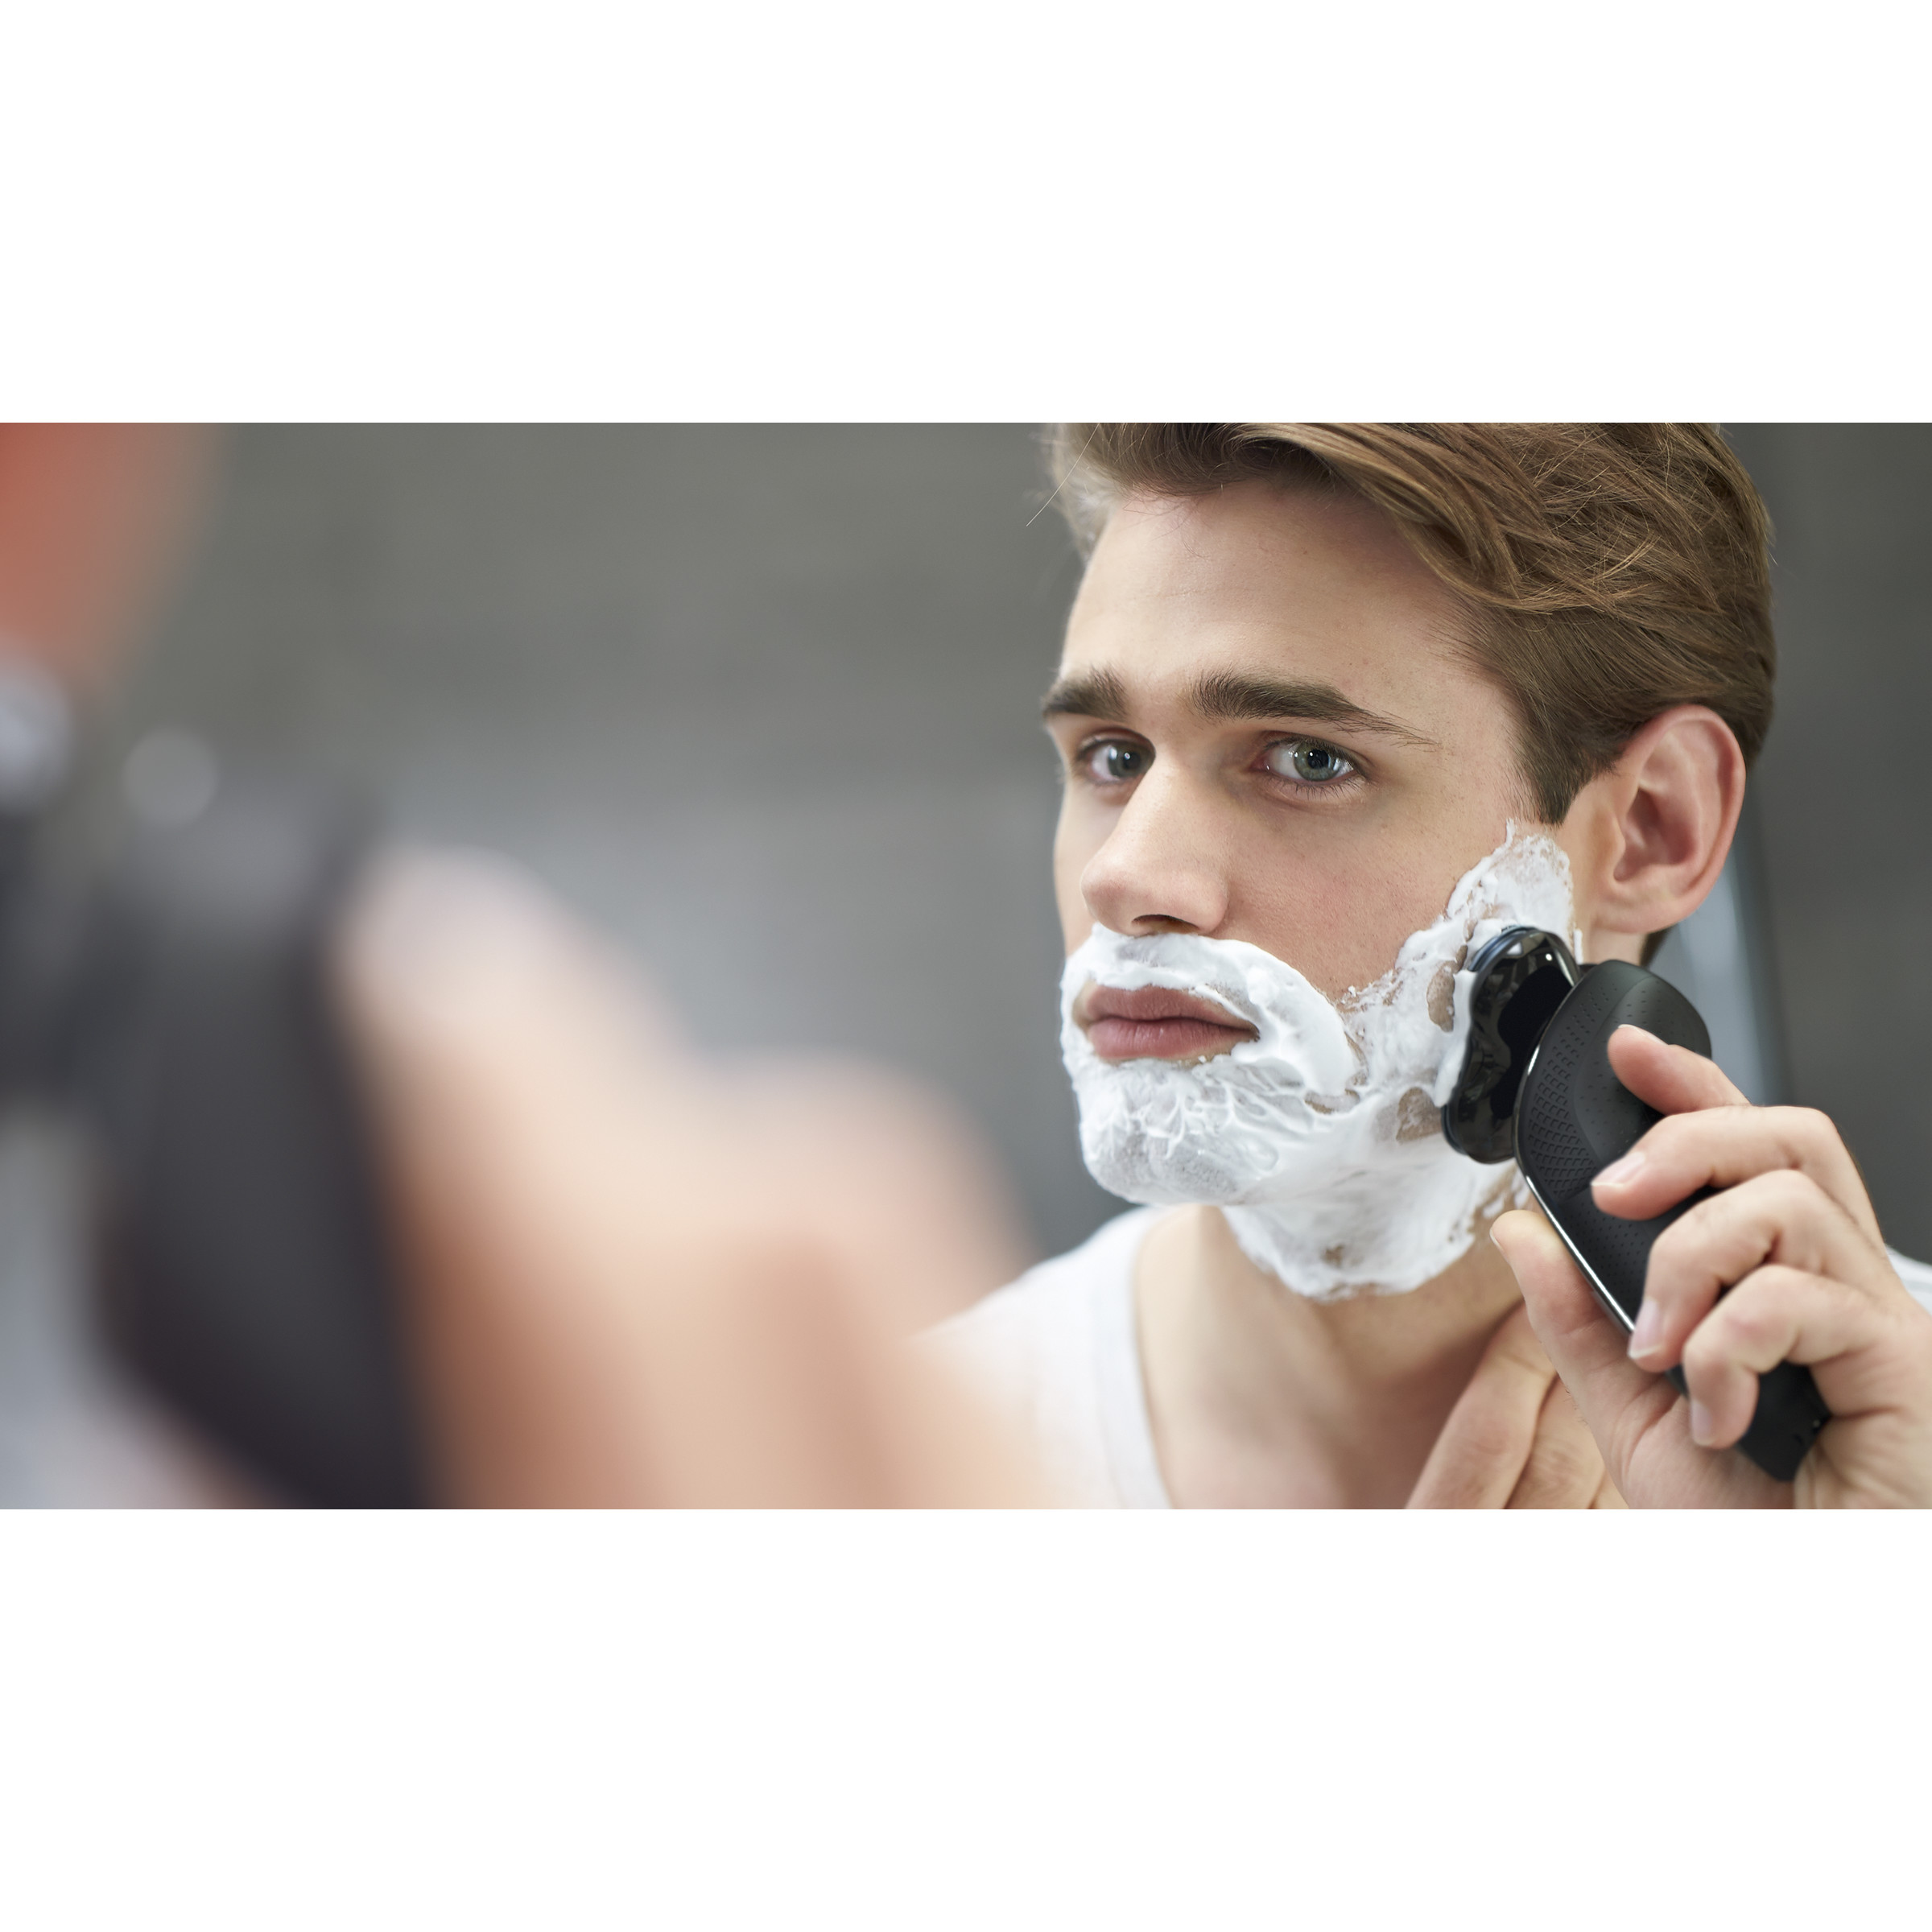 Philips Norelco Electric Shaver 6850 with Precision Trimmer and Nose Trimmer Attachment, S6850/85 - image 4 of 7